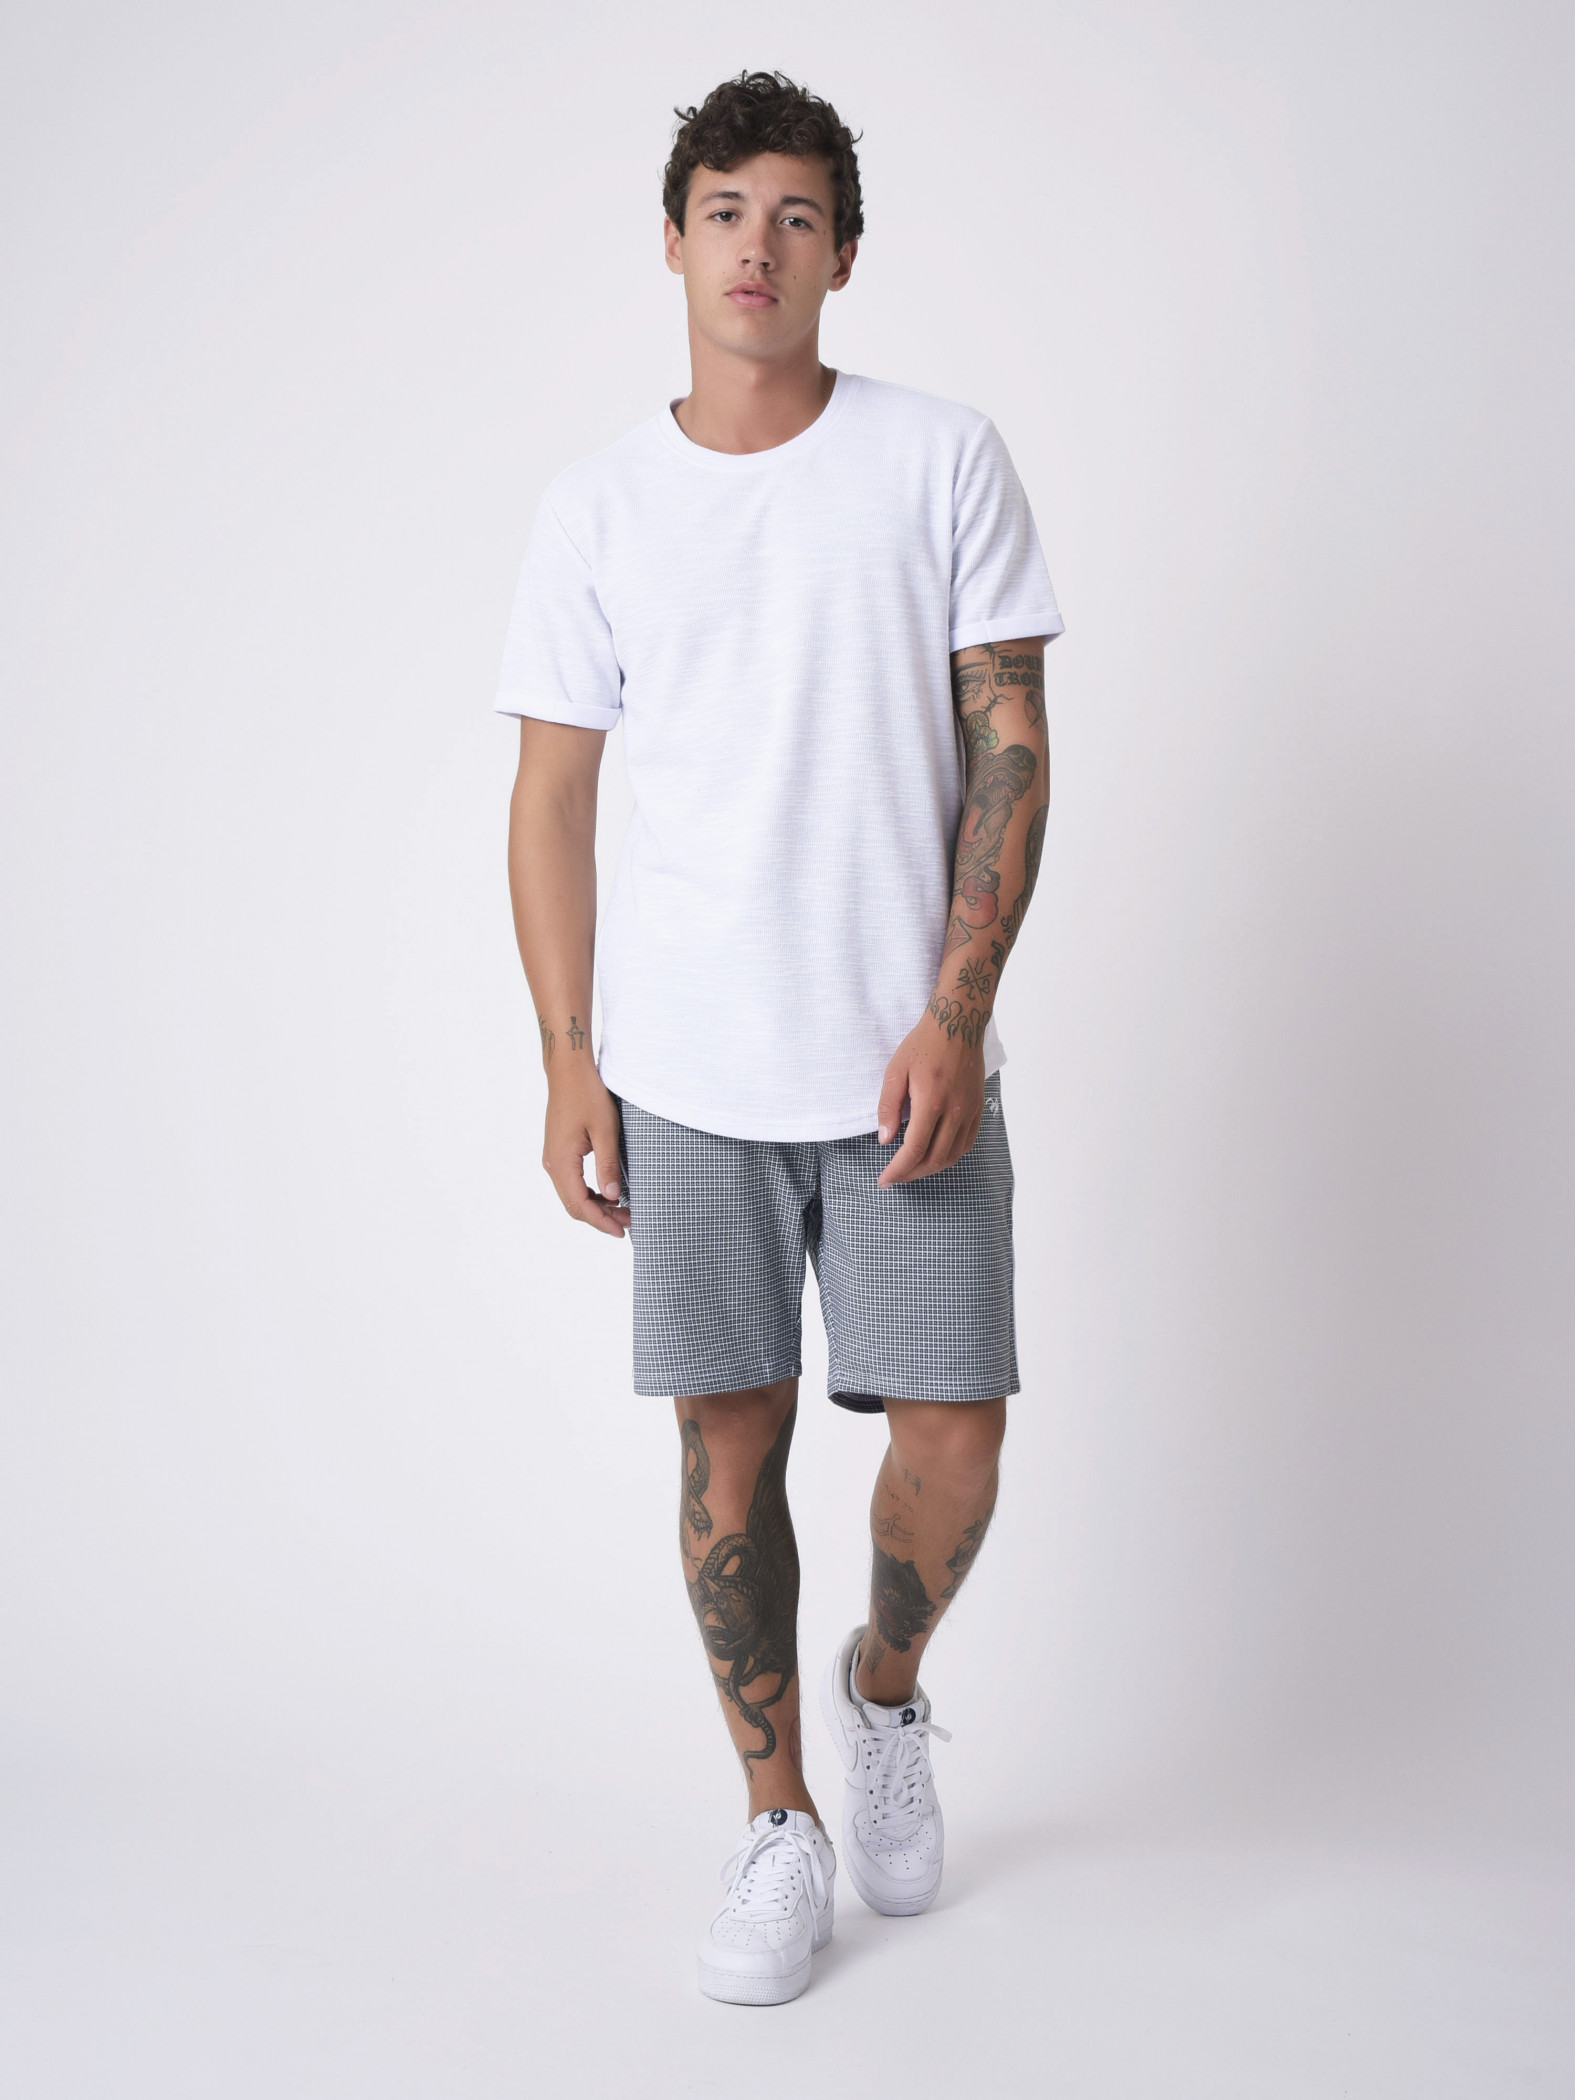 Buy > mens smart casual shorts > in stock